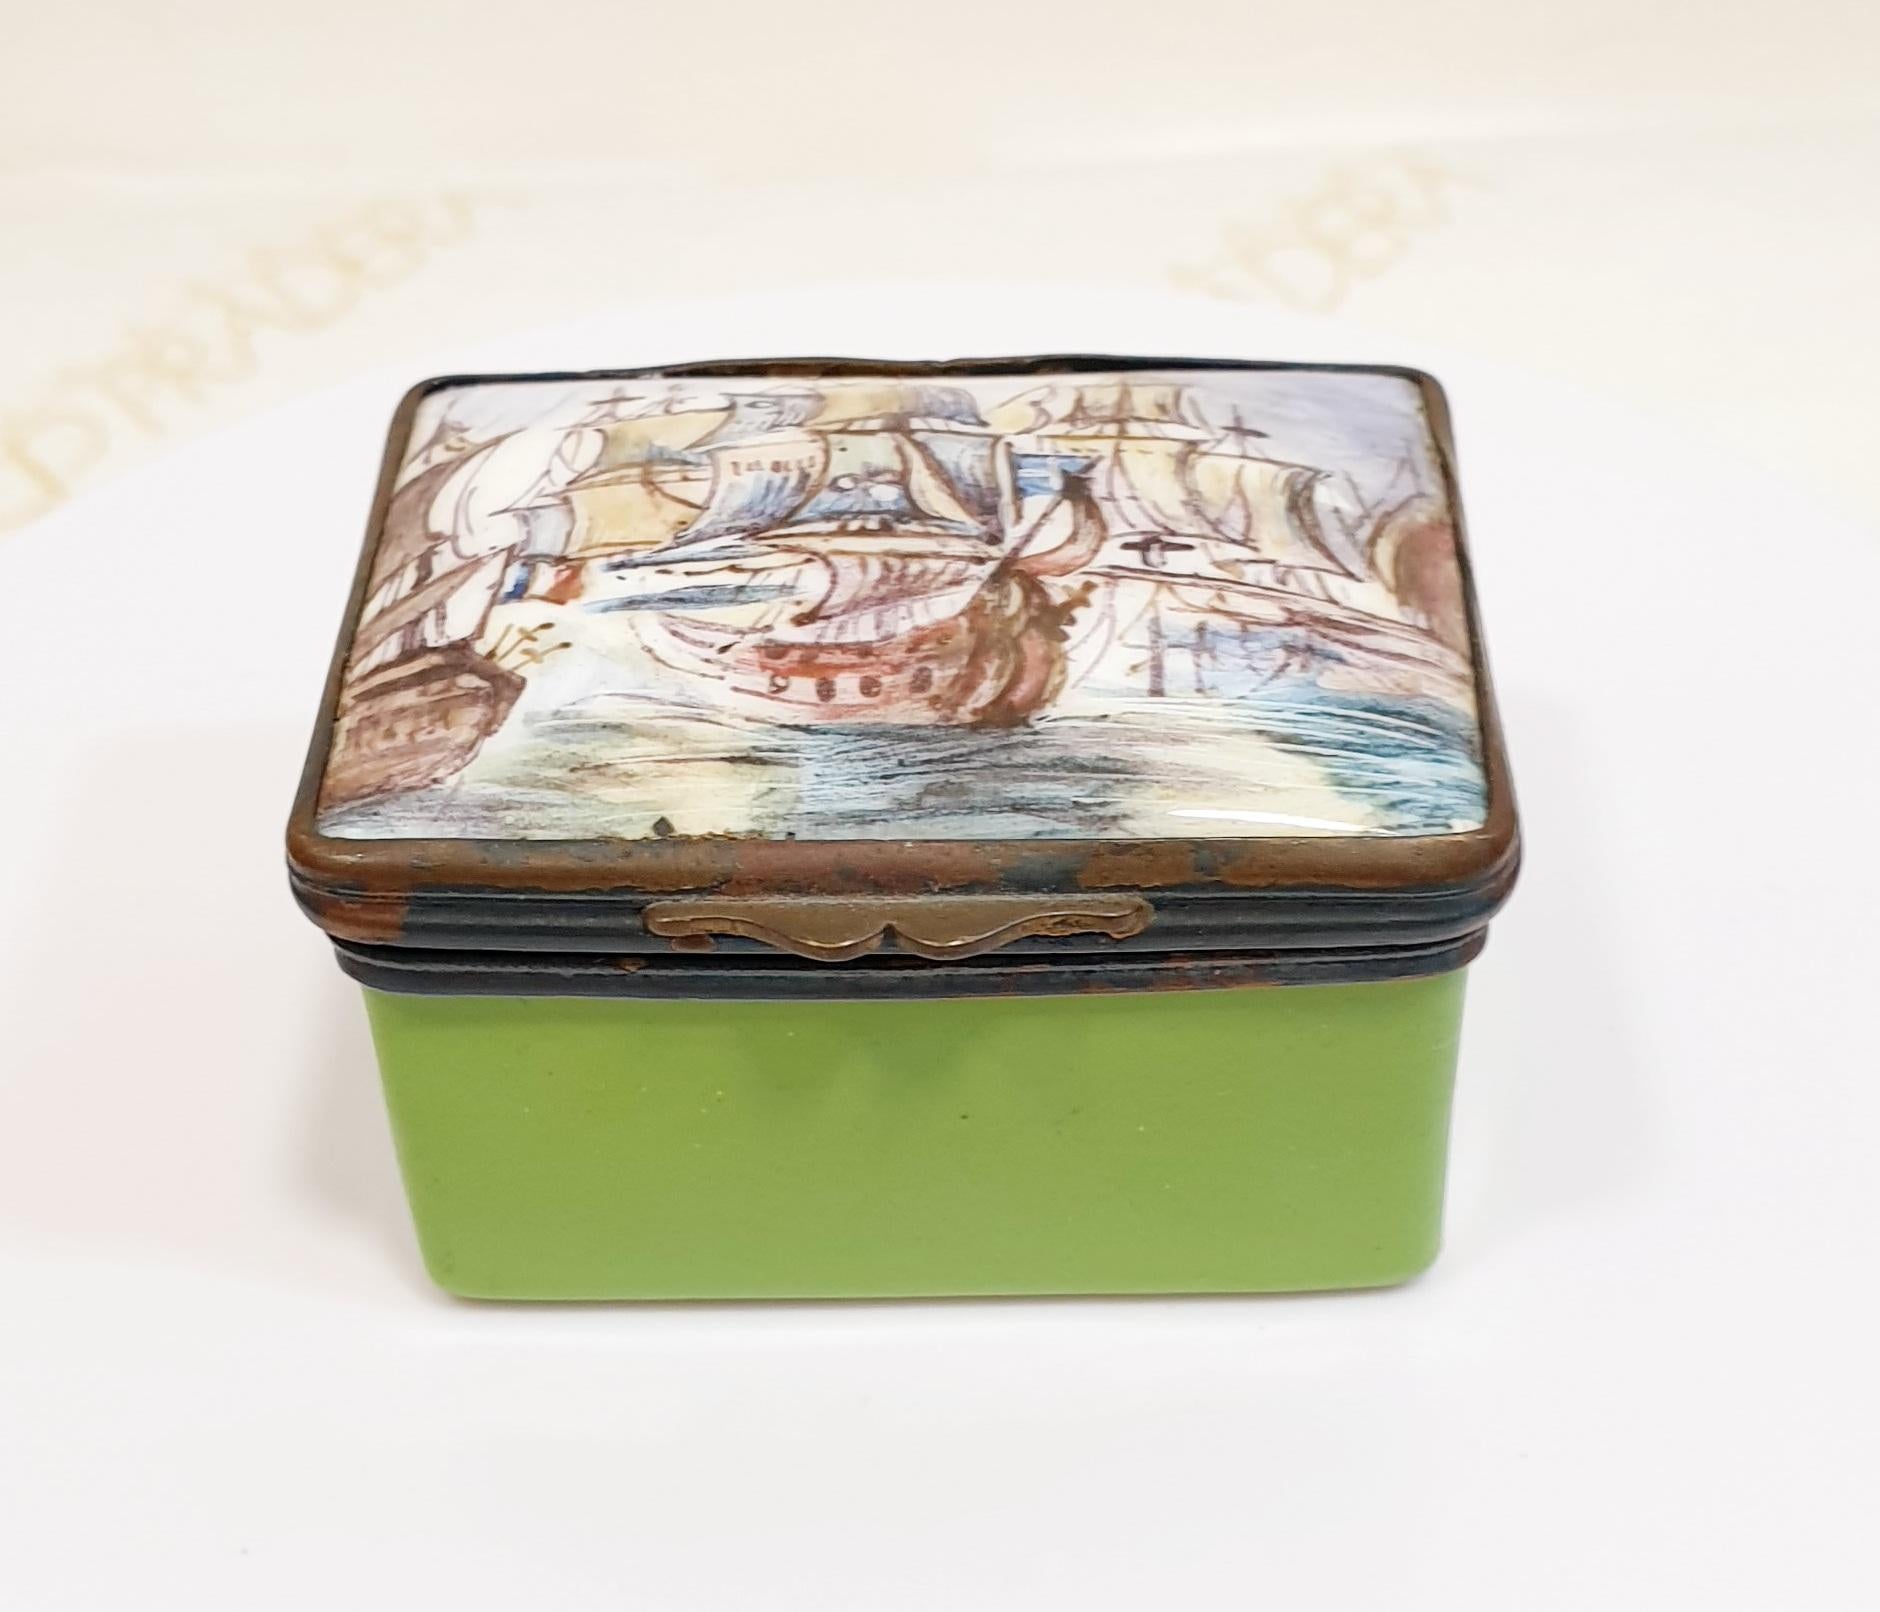 Antique 19th Jewellery hand painted porcelain box with hunting horse scene
aprox 1880 hand painted in yellow porcelaine
Perfect gift for decoration or keeping personal and valuable items

PRADERA is a second generation of a family run business